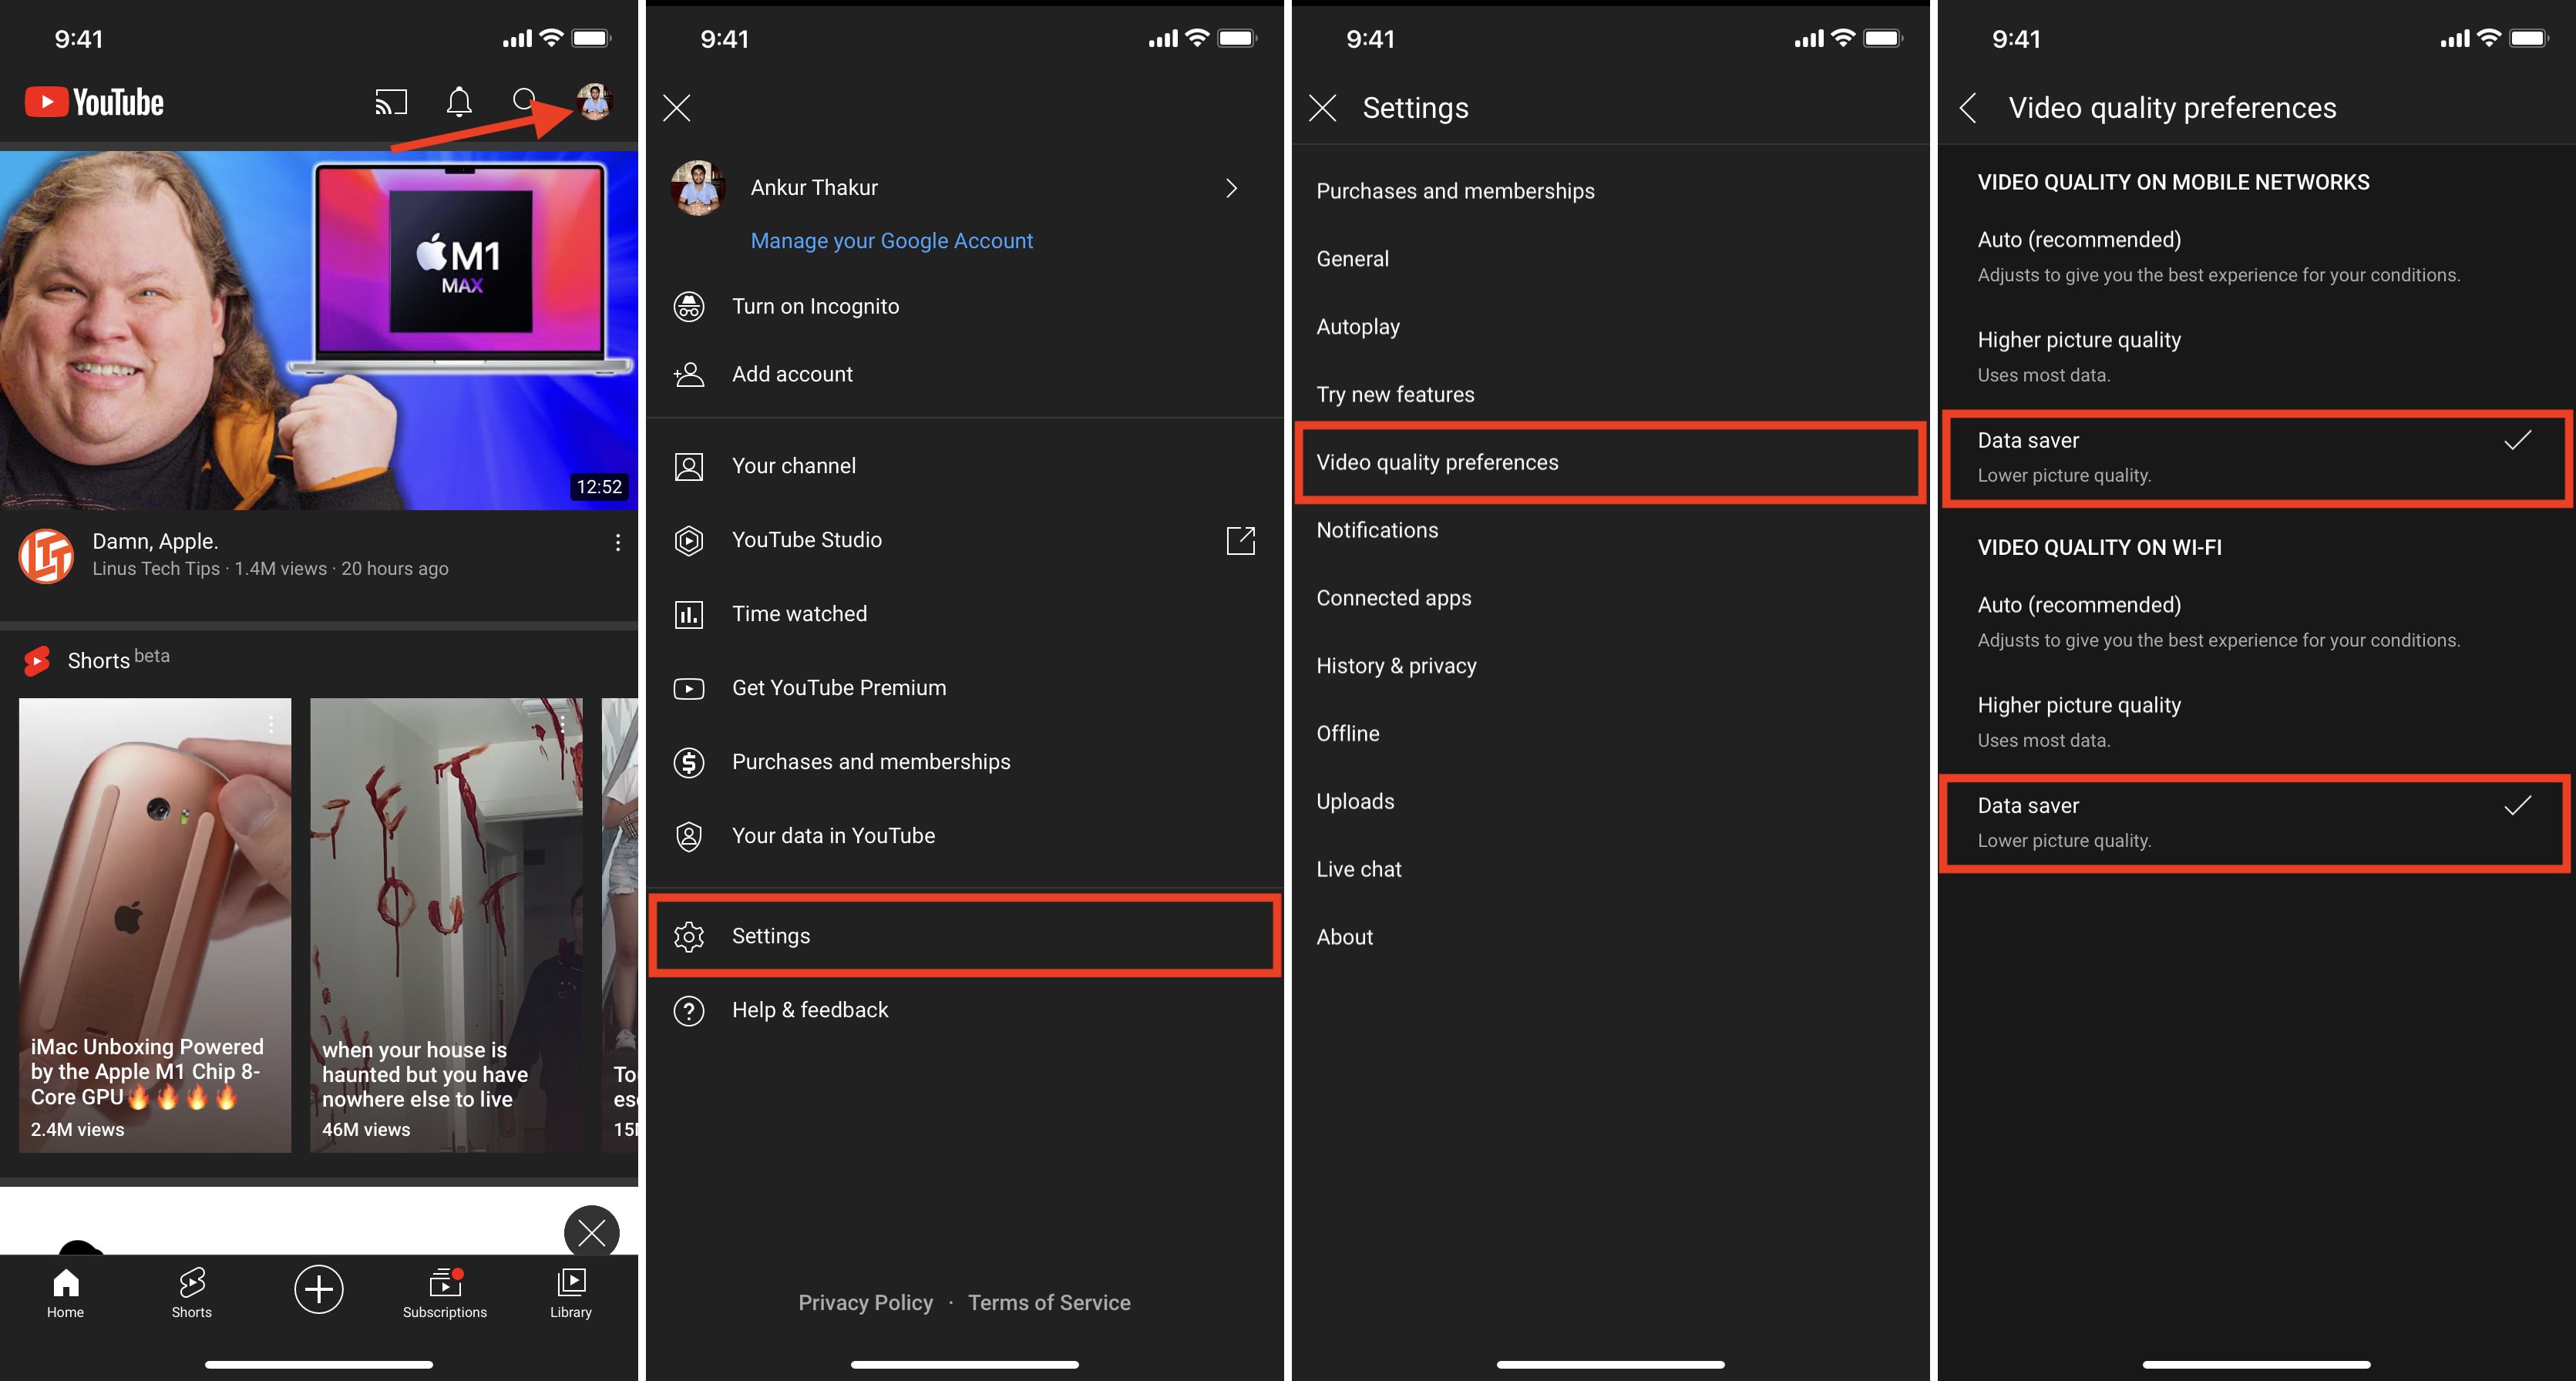 Change YouTube Video quality preferences to Data Saver